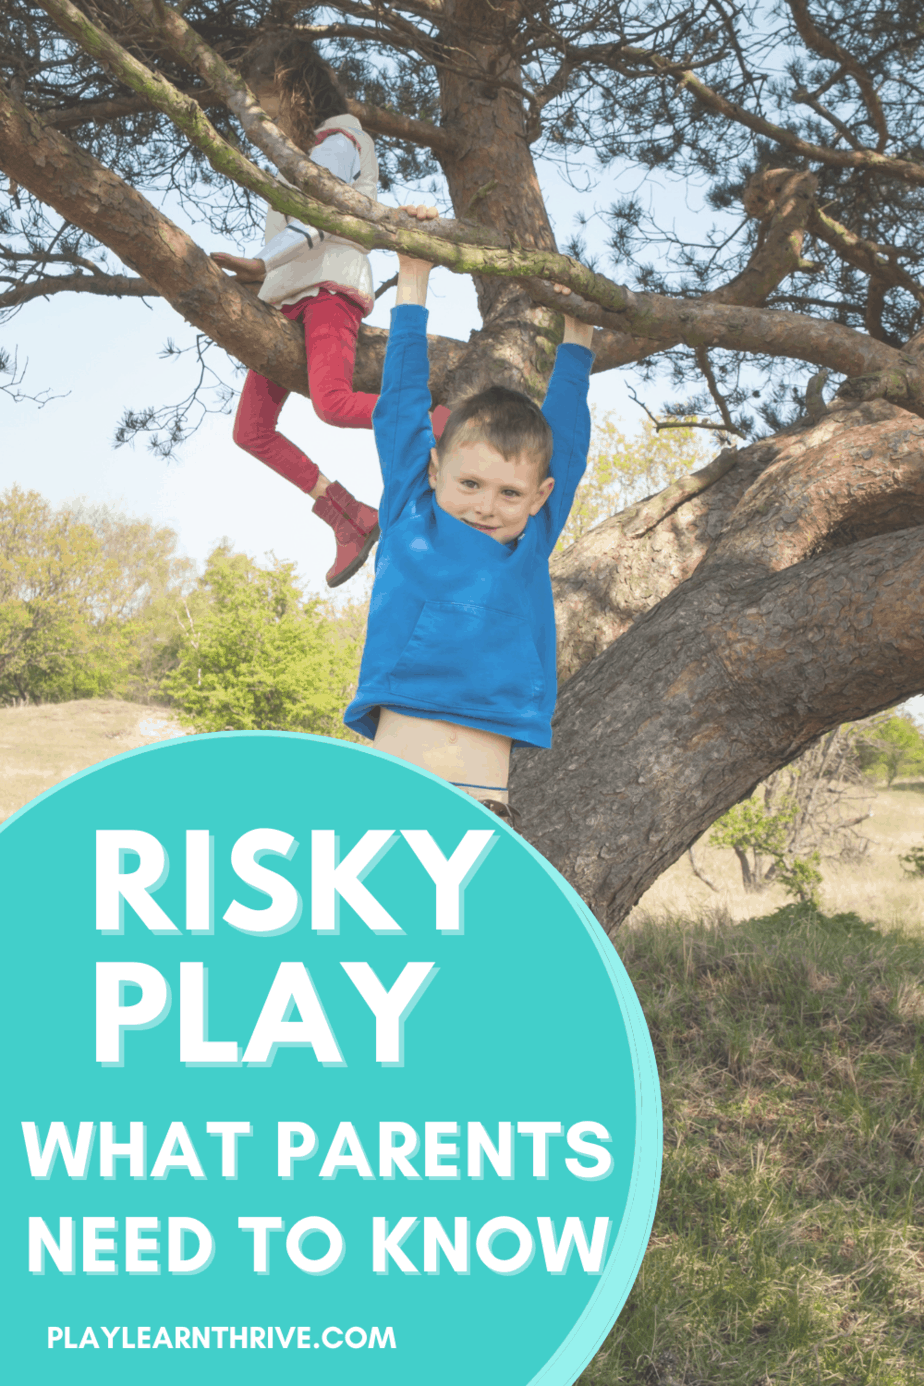 Parenting advice: 'Risky play' good for children